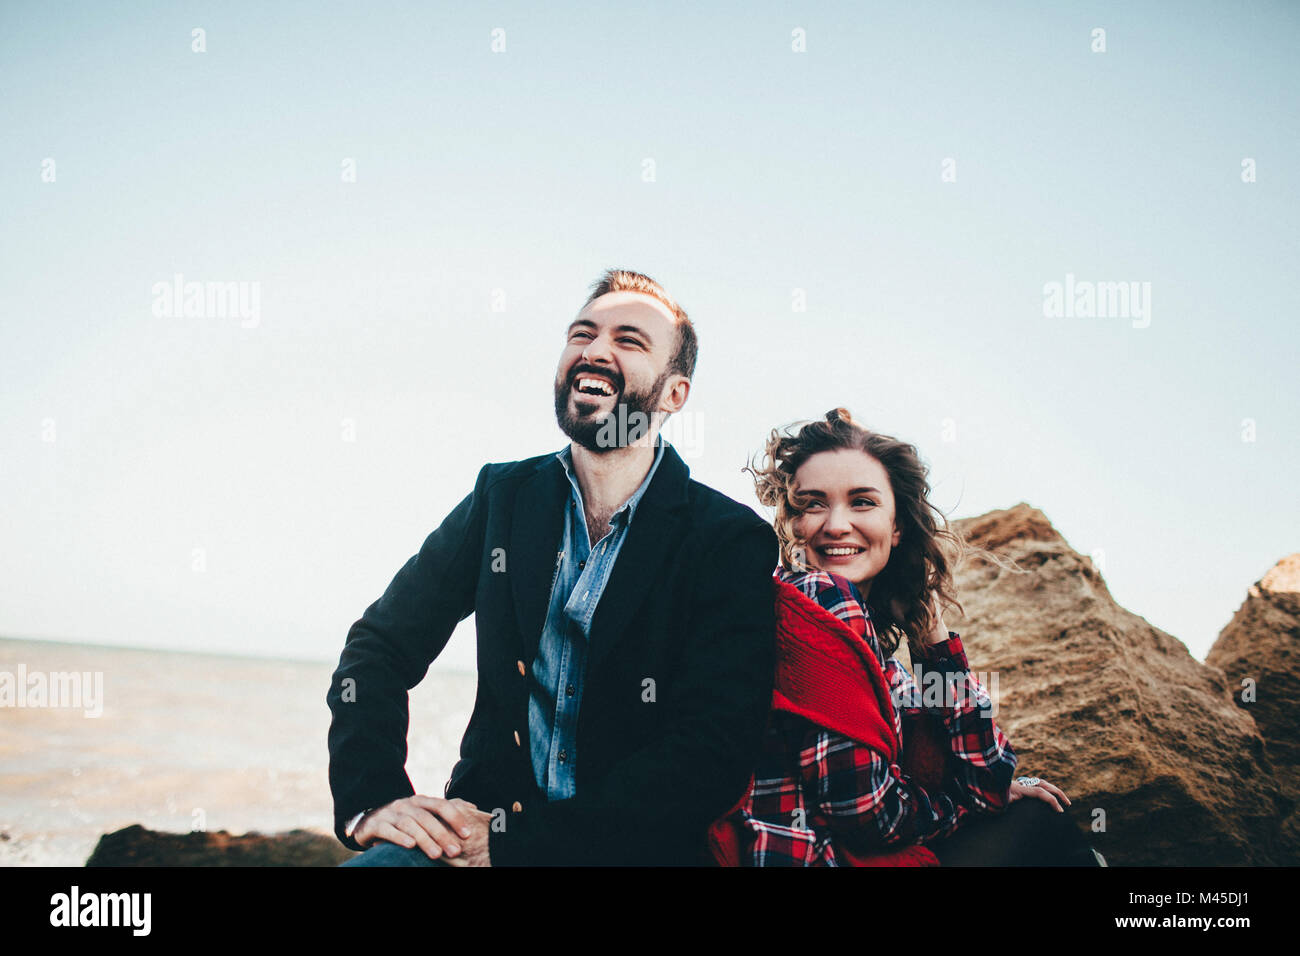 Mid adult couple laughing together on beach, Odessa Oblast, Ukraine Stock Photo